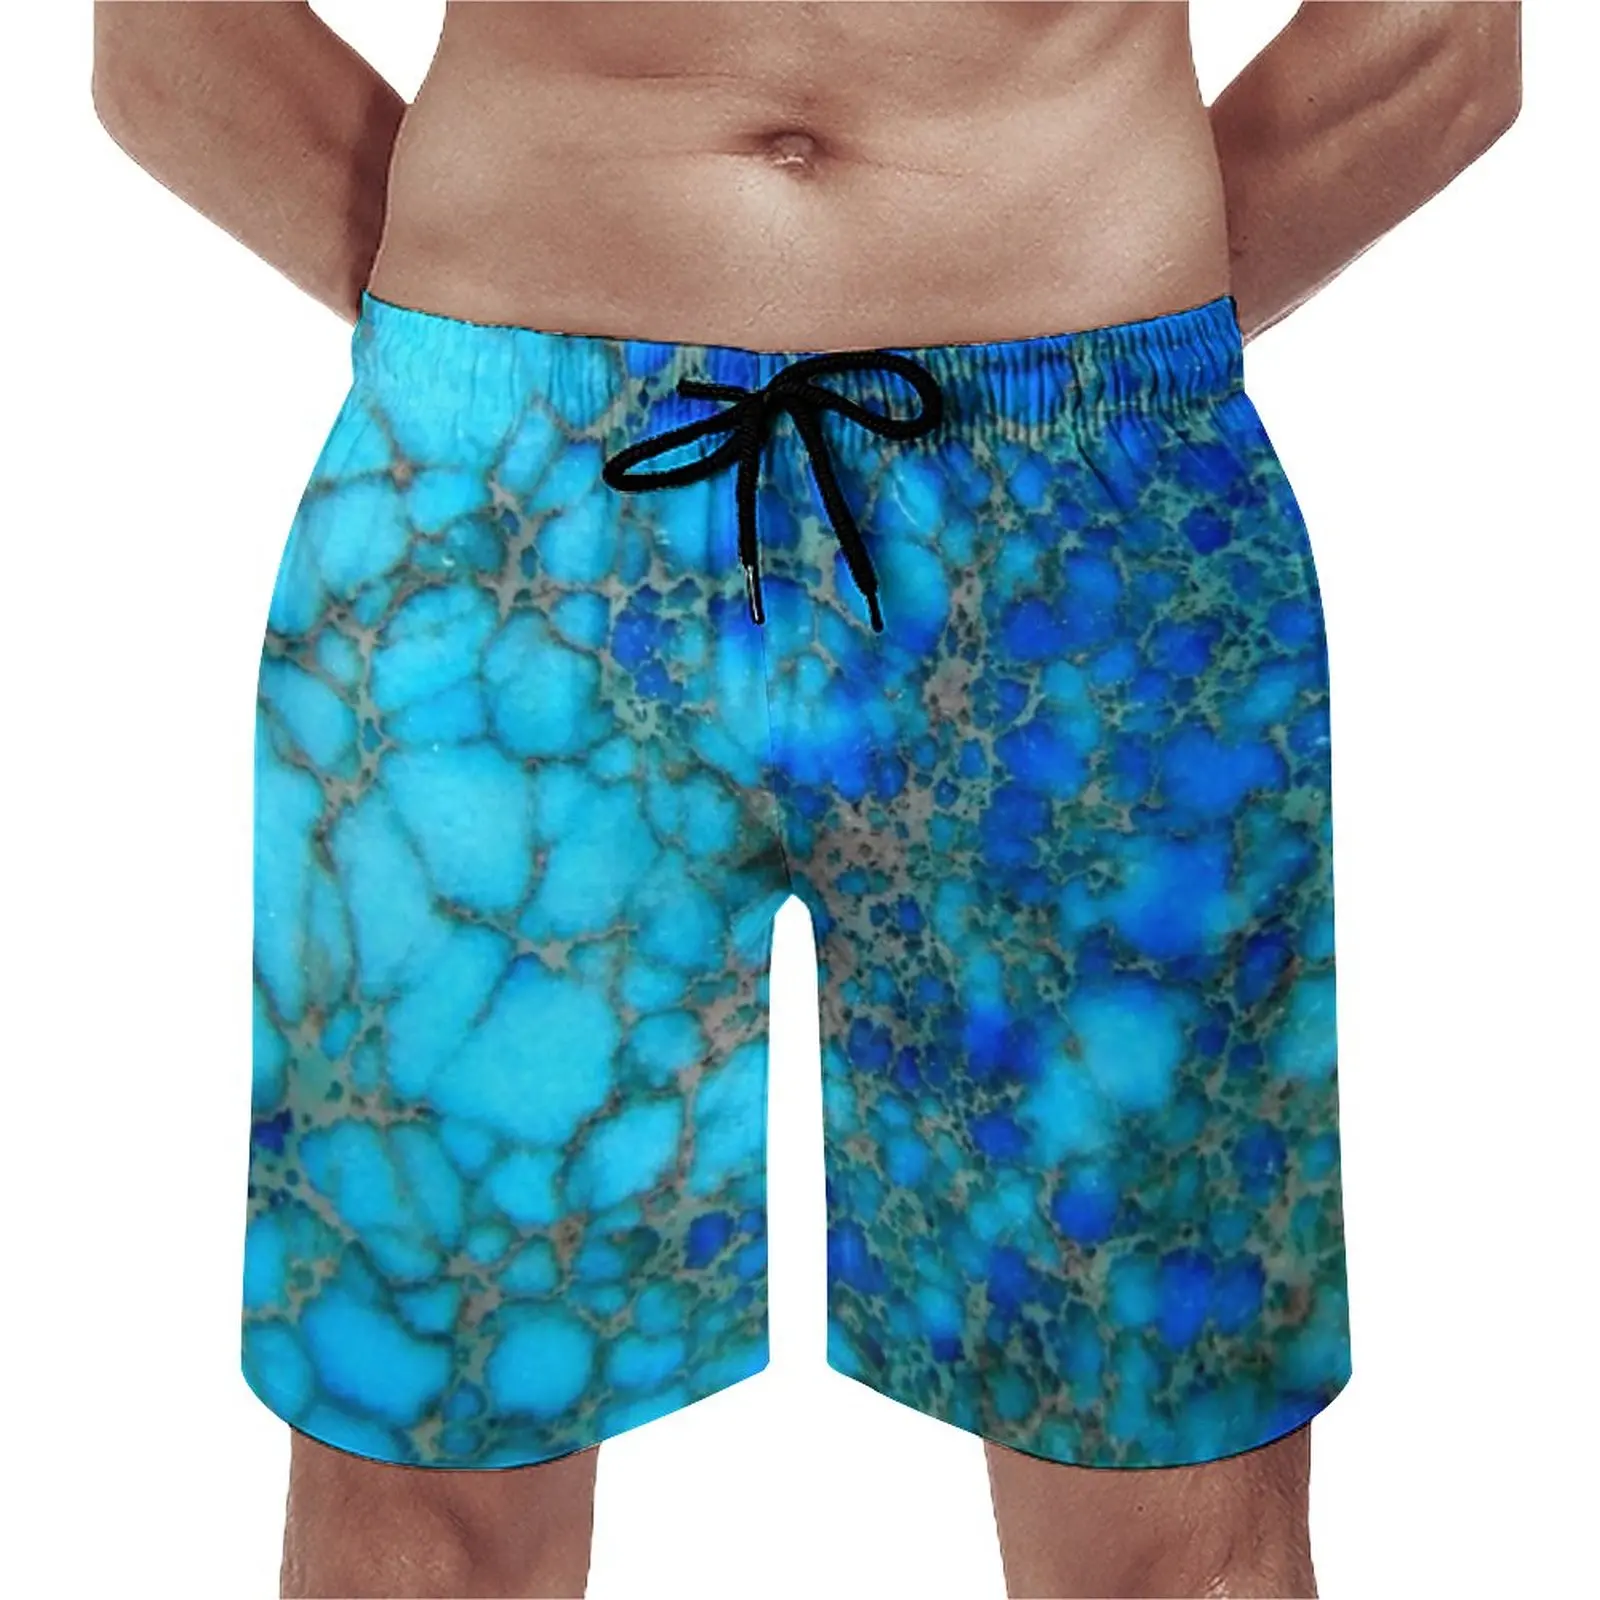 

Blue Marble Texture Board Shorts Summer Turquoise Stone Print Fashion Board Short Pants Men Running Surf Quick Dry Beach Trunks